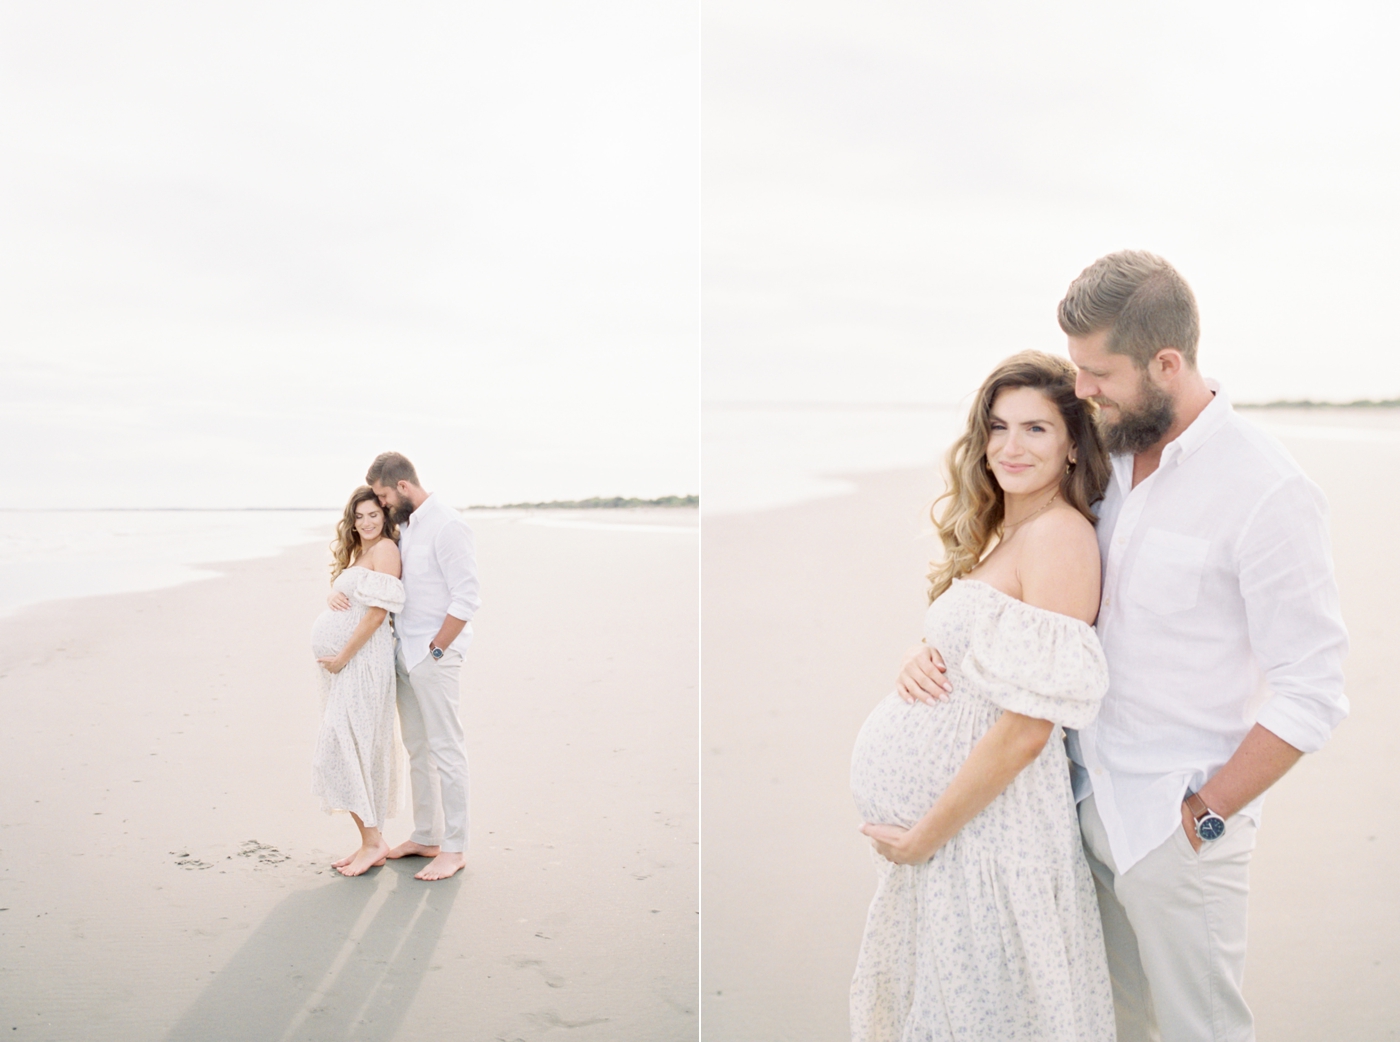 New parents on the beach at sunset | Photo by Caitlyn Motycka Photography.